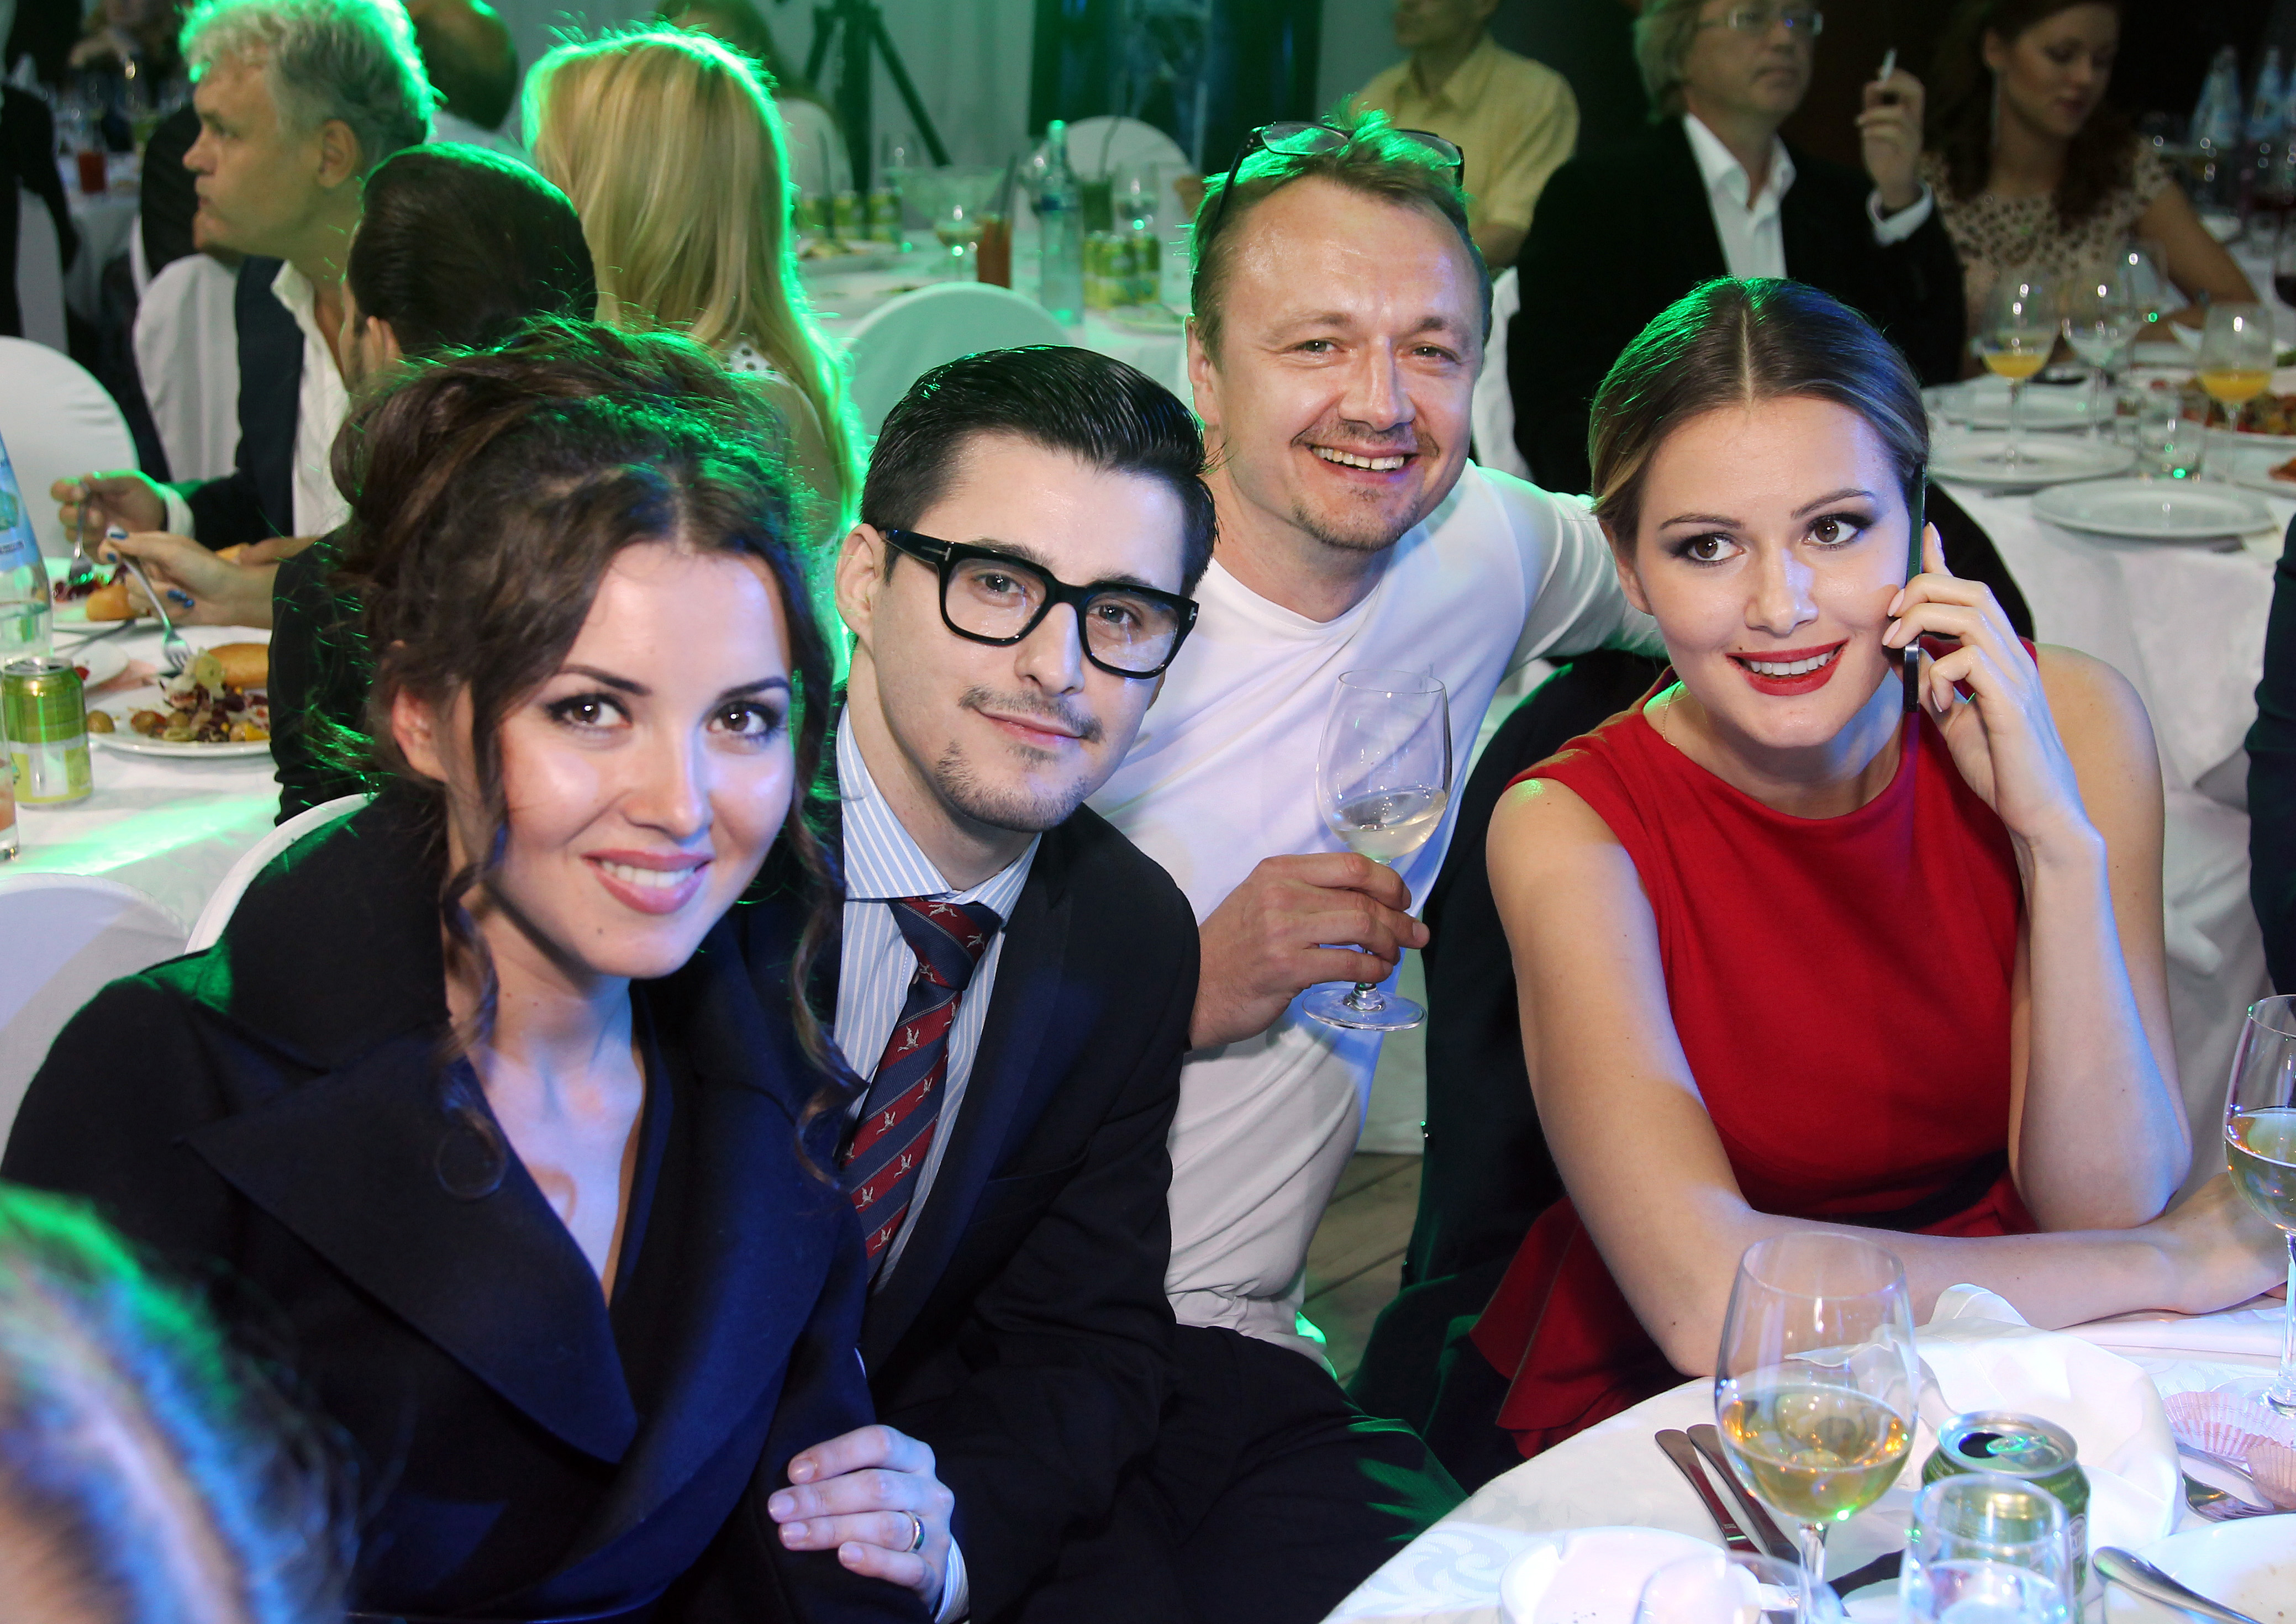 (L-R) Actress Alesa Kocher, producer Josh Wood, a guest (C) and Duma deputy, actress Maria Kozhevnikova (R) attends the 35th Moscow International Film Festival After Party on the opening night on June 20, 2013 in Moscow, Russia.